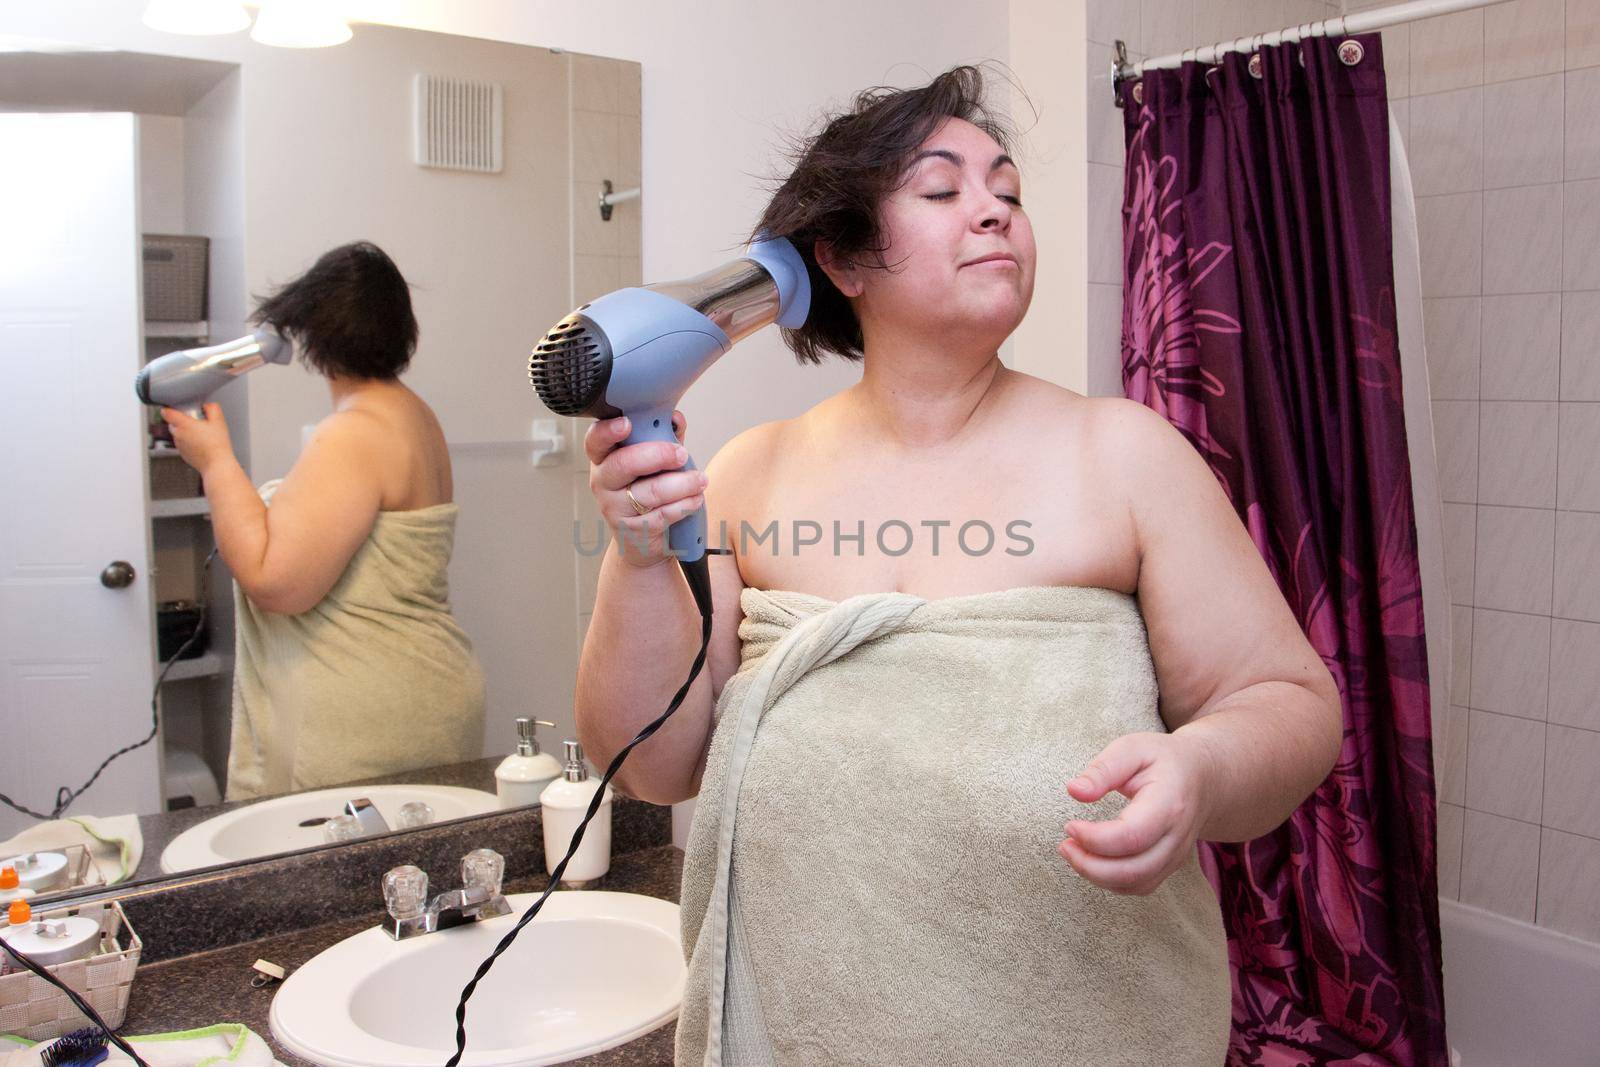 Drying hair wrapped in a towel, a woman stands in her bathroom preparing to go out 